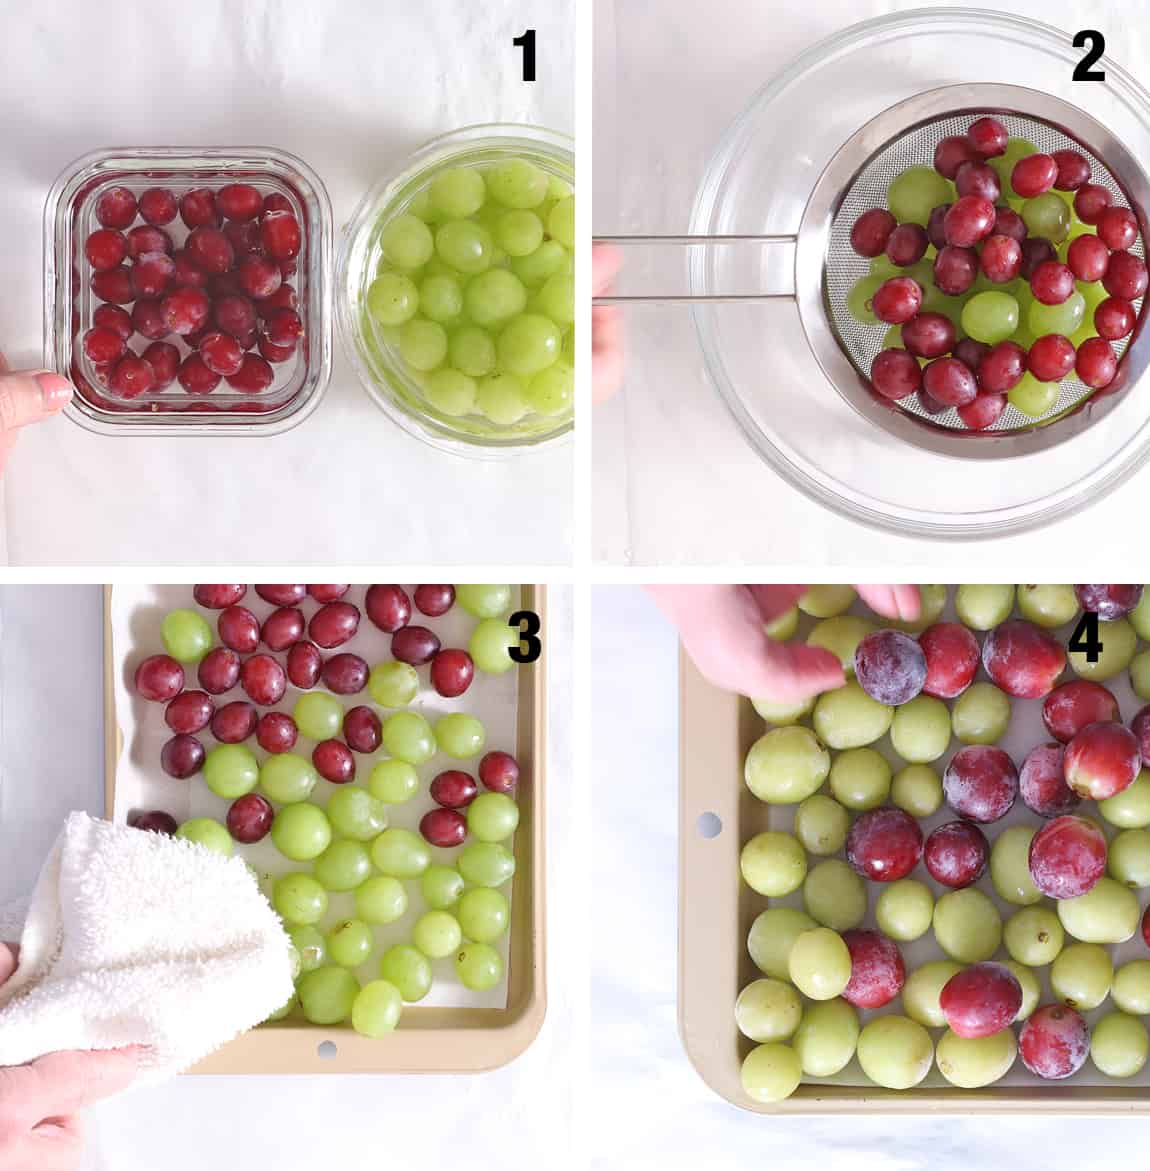 steps to make frozen grapes.